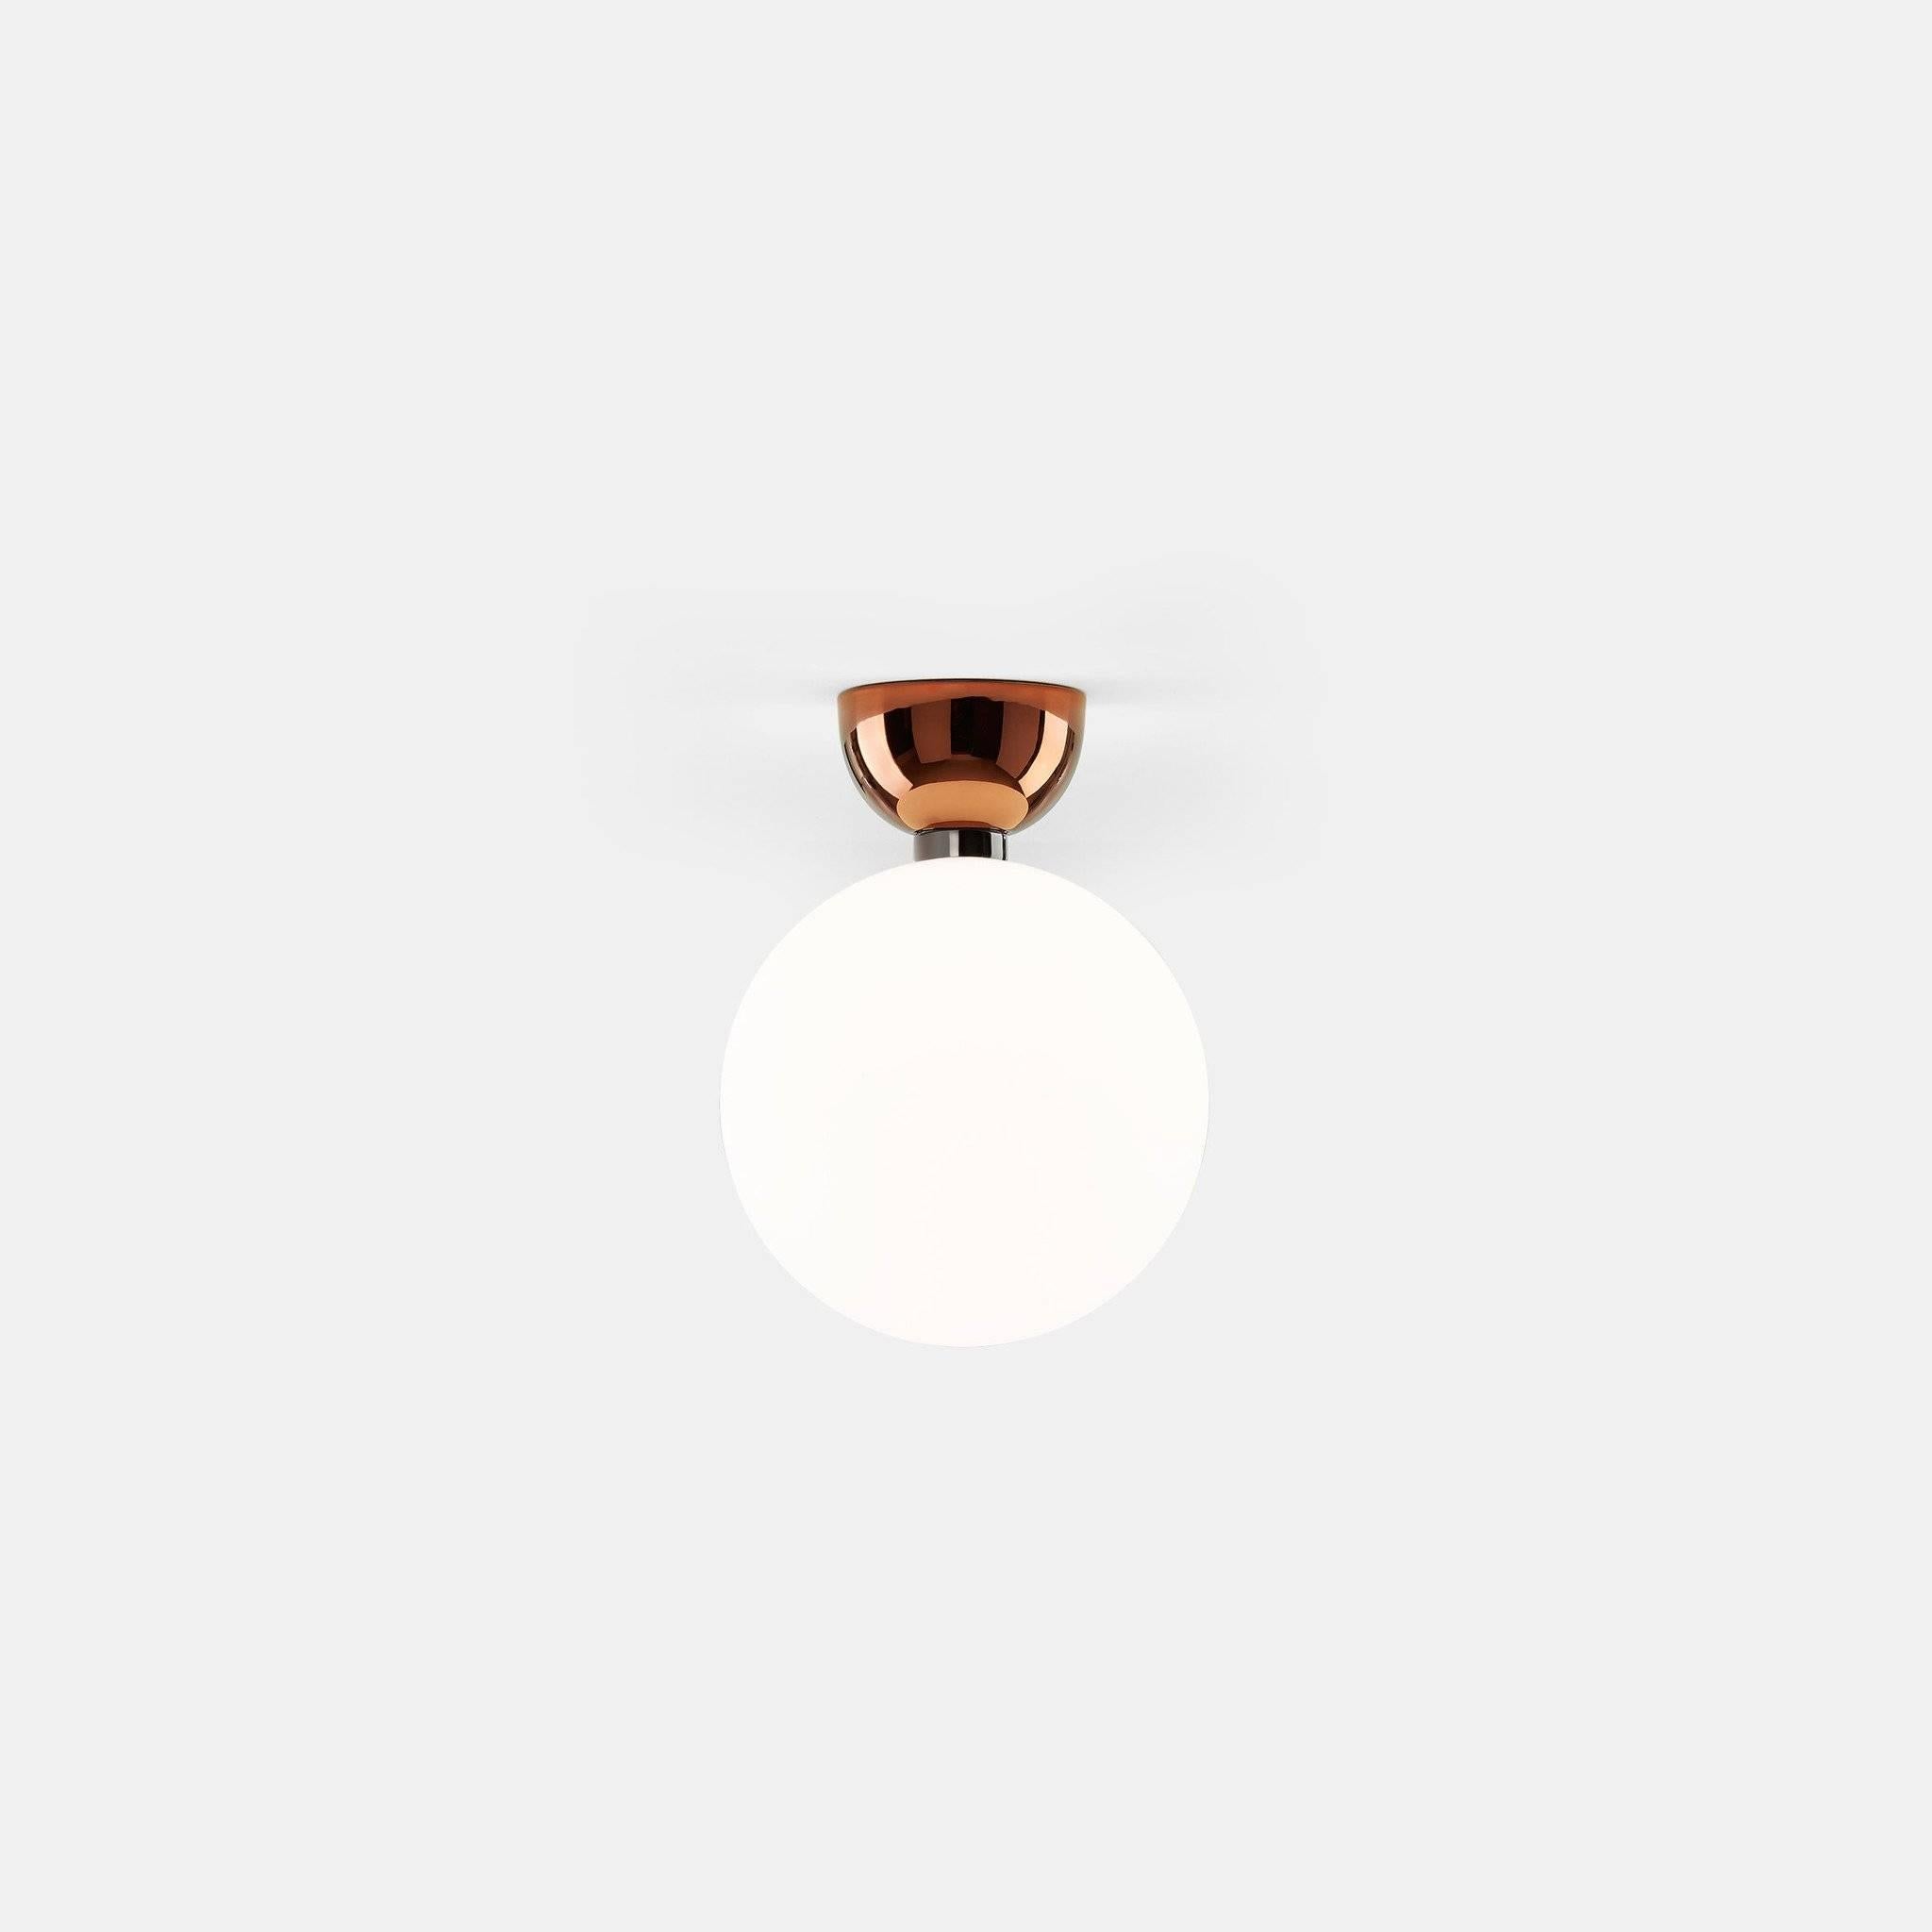 Wall / Ceiling lamp with a painted ceramic base in black, white, copper, golden or platinum finish and a diffuser in blown opal matte glass. 

Designed by Jaime Hayon.

Material:
Structure: Ceramic
Diffuser: Glass

Voltage: 230V
Light